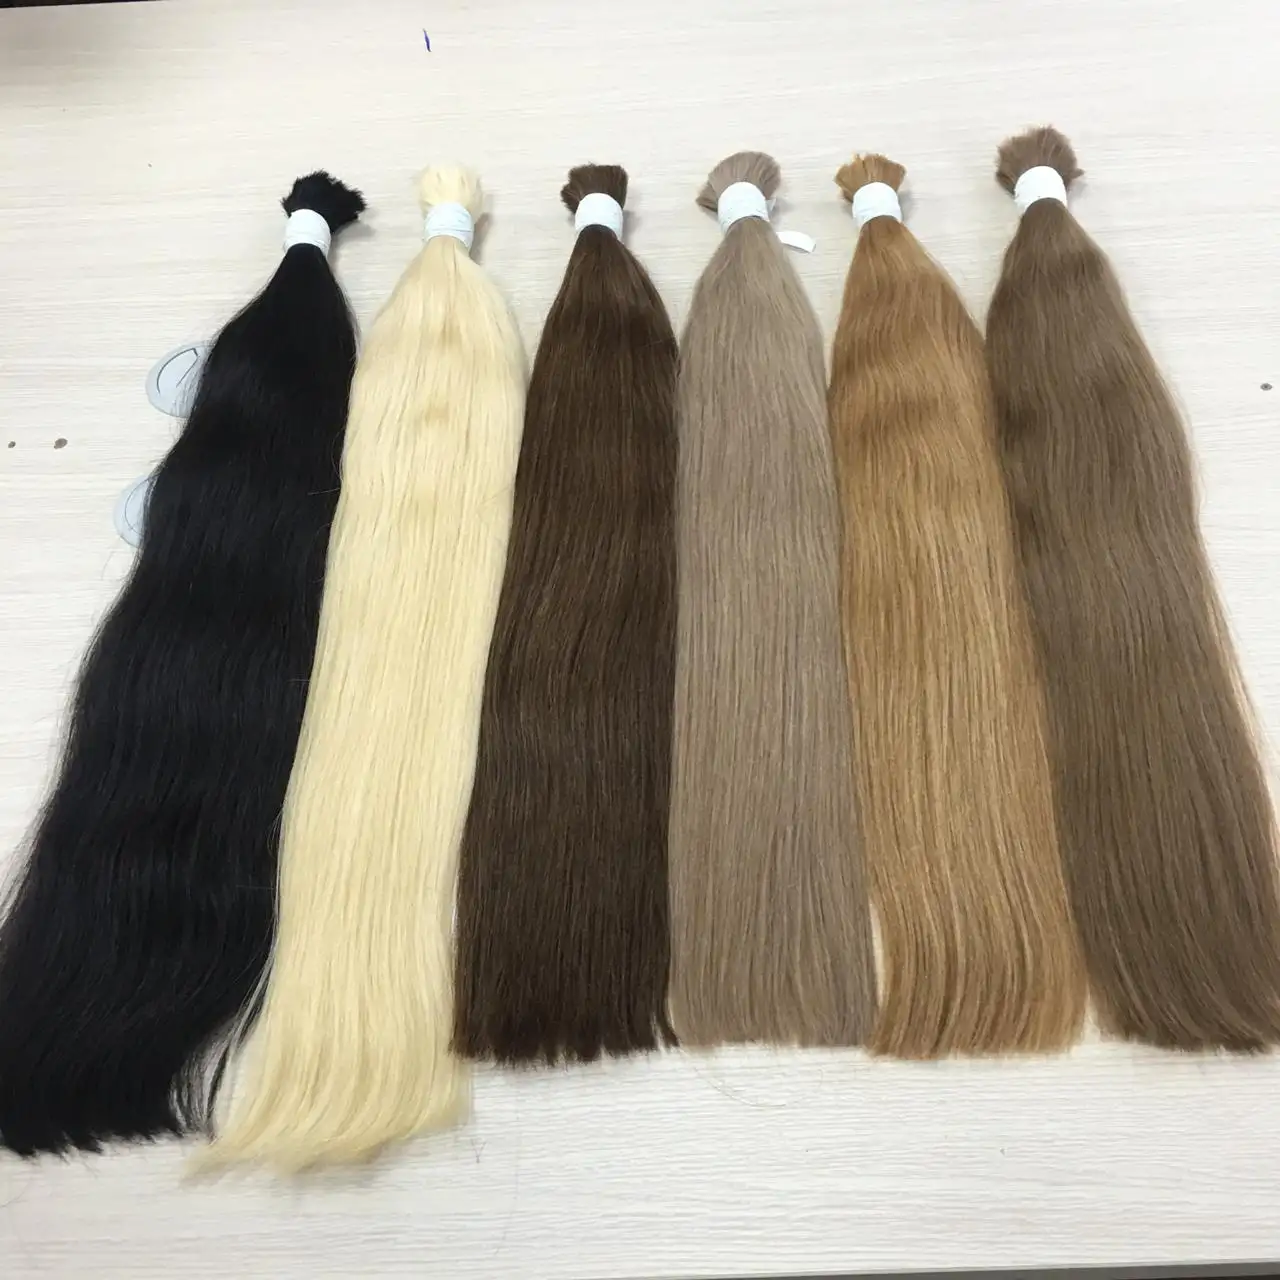 Full Colors Ash Color/ Warm Color Raw Human Hair Extensions Bulk / Weft/ I U V Nail Tips Wholesale from Factory